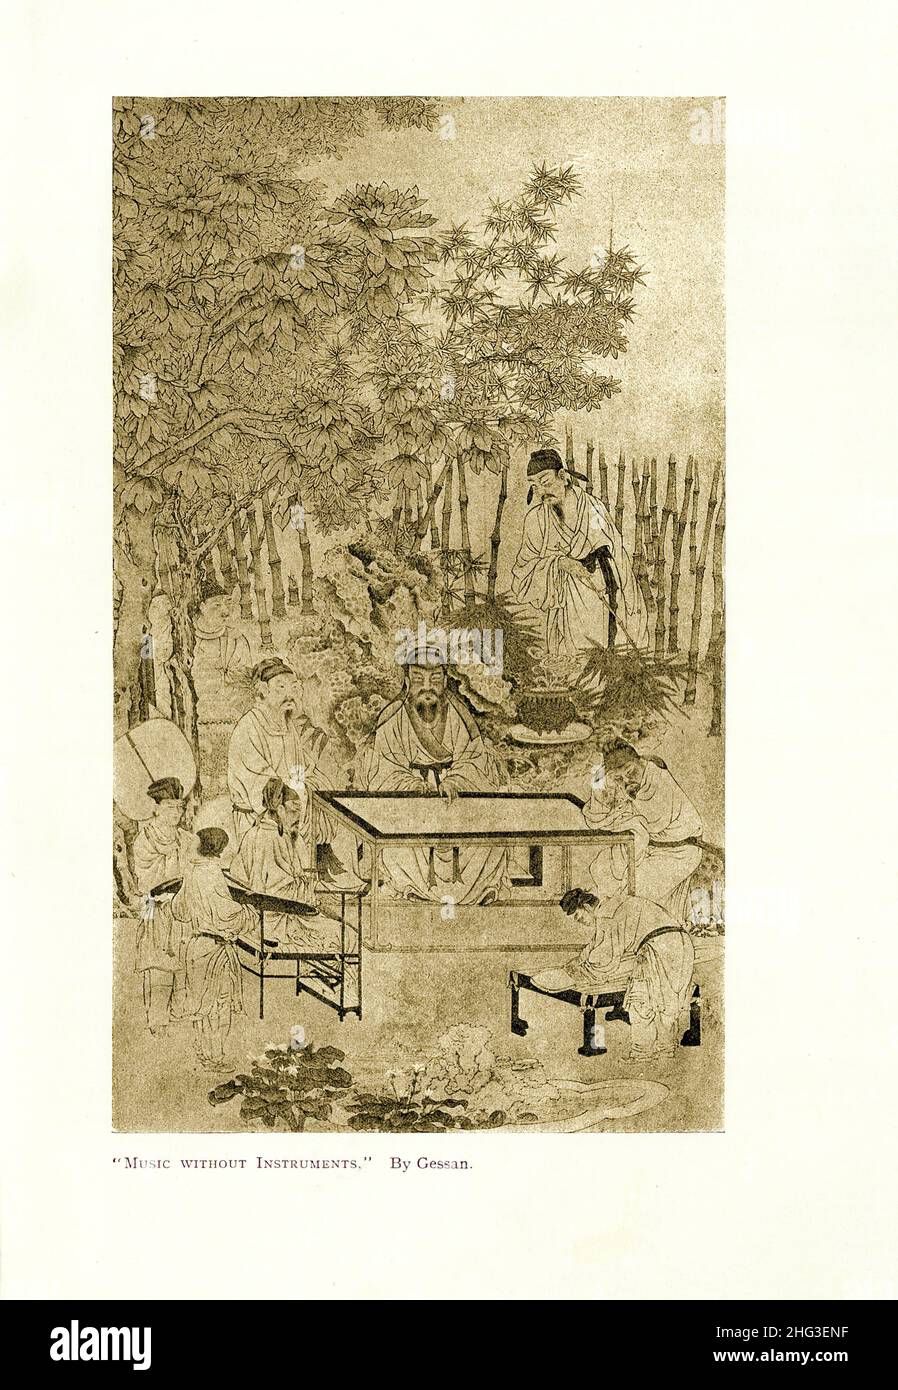 Chinese medieval painting: Music Without Instruments. By Gessan. Reproduction of book illustration of 1912 Stock Photo